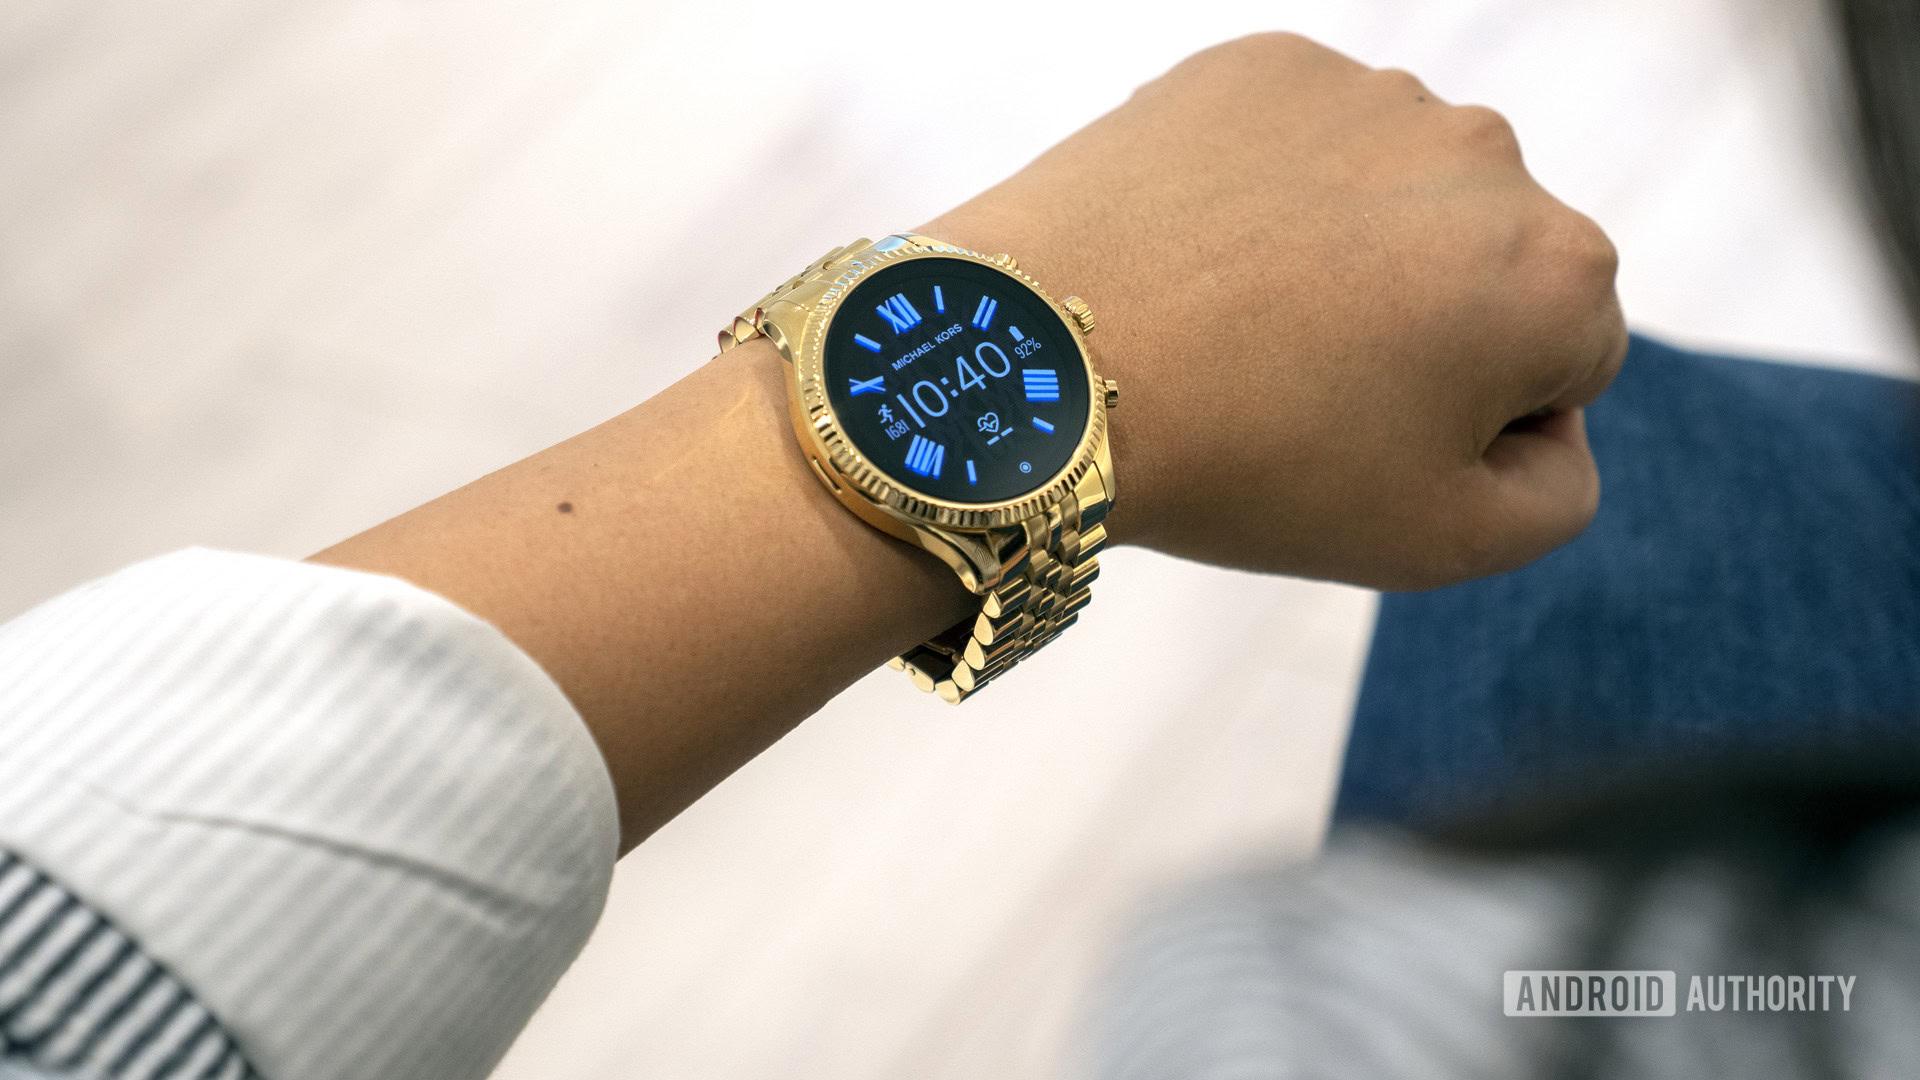 The best Michael Kors smartwatches for women - Android Authority